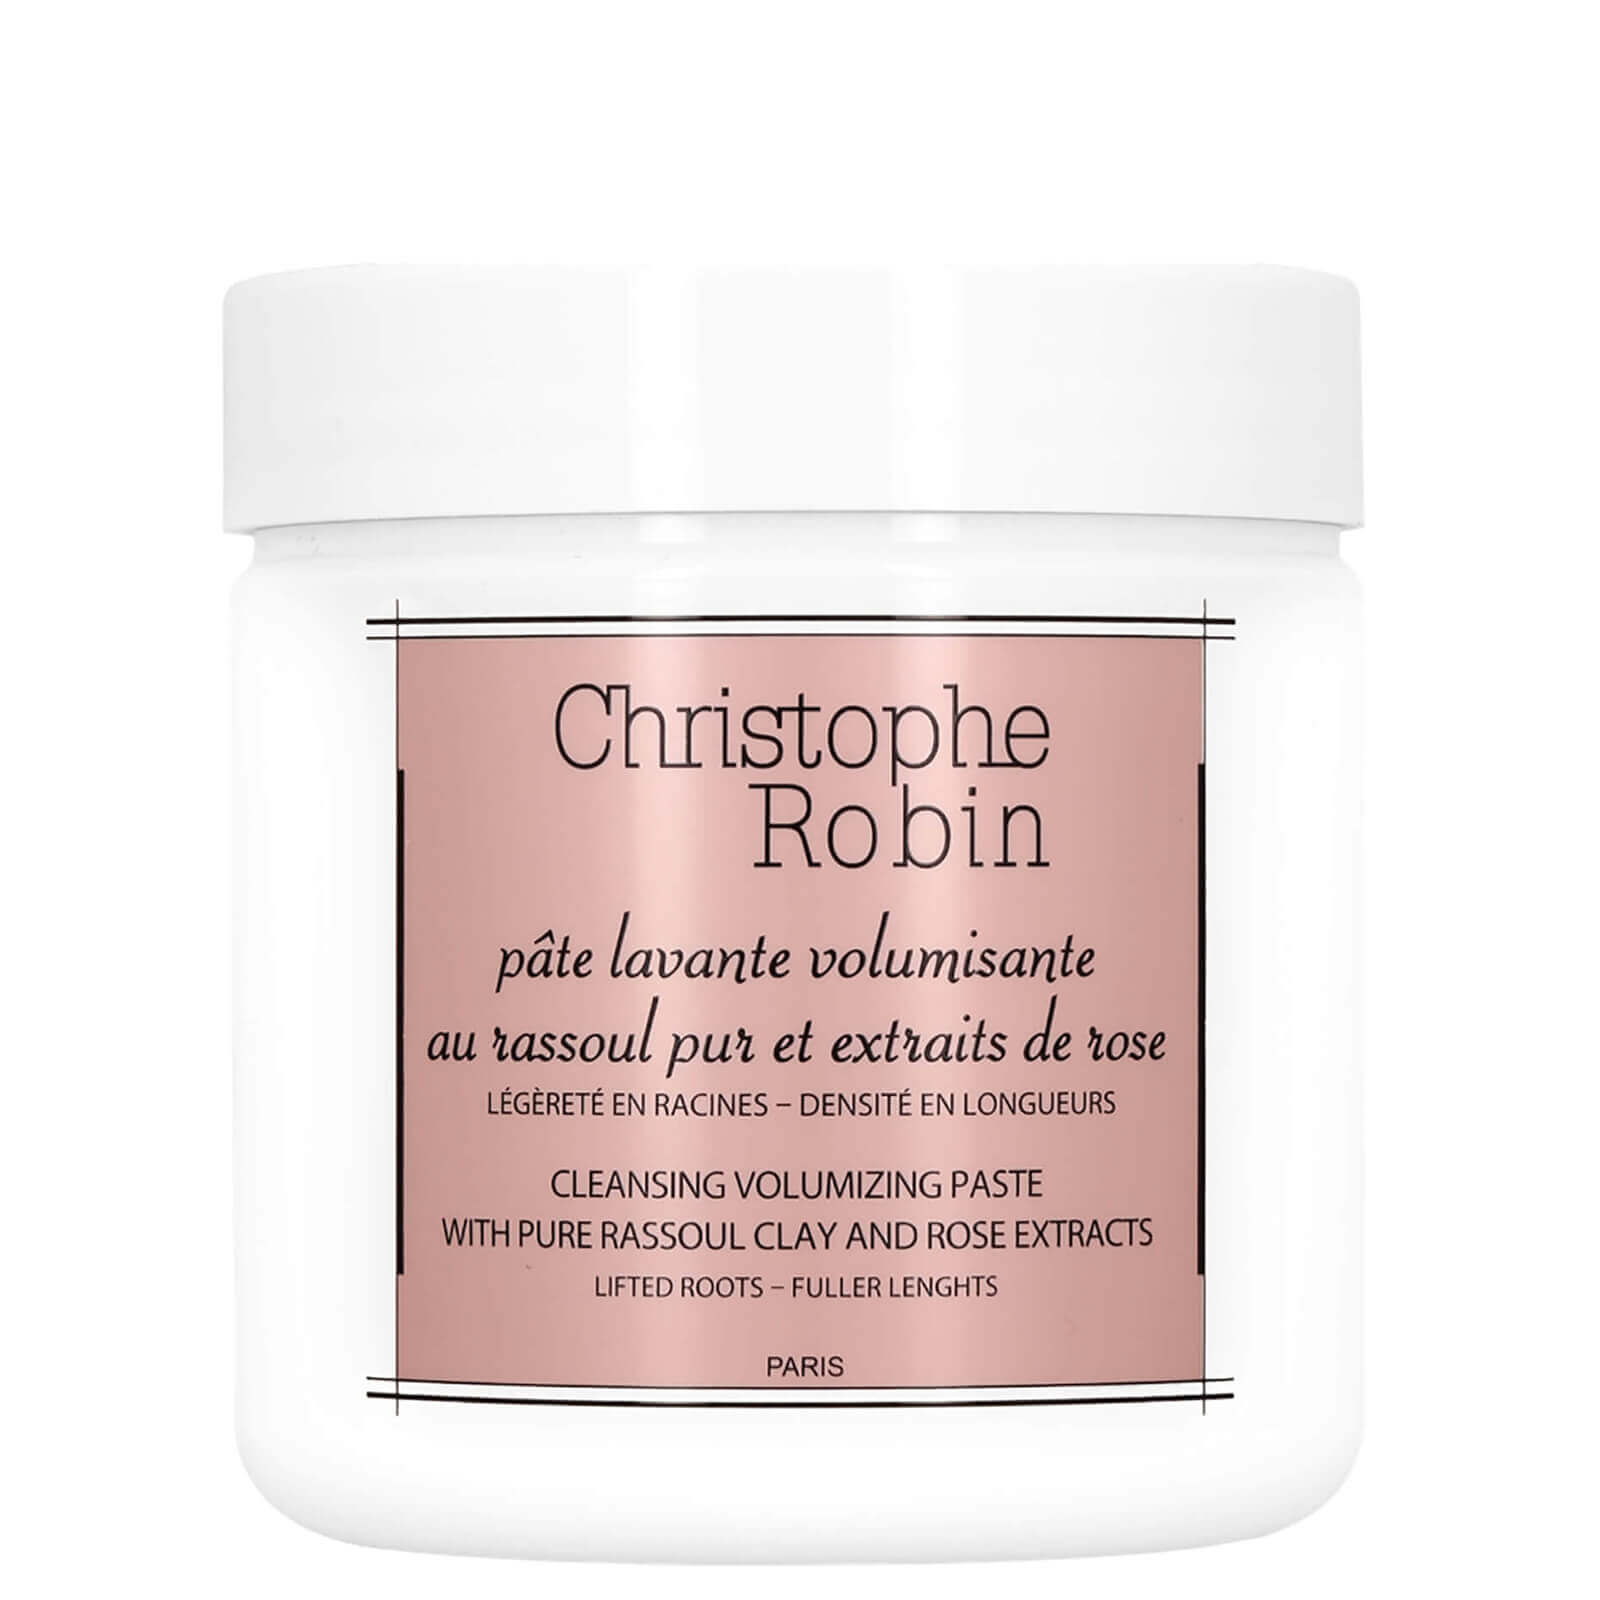 Image of Christophe Robin Cleansing Volumizing Paste with Pure Rassoul Clay and Rose Extracts 250ml